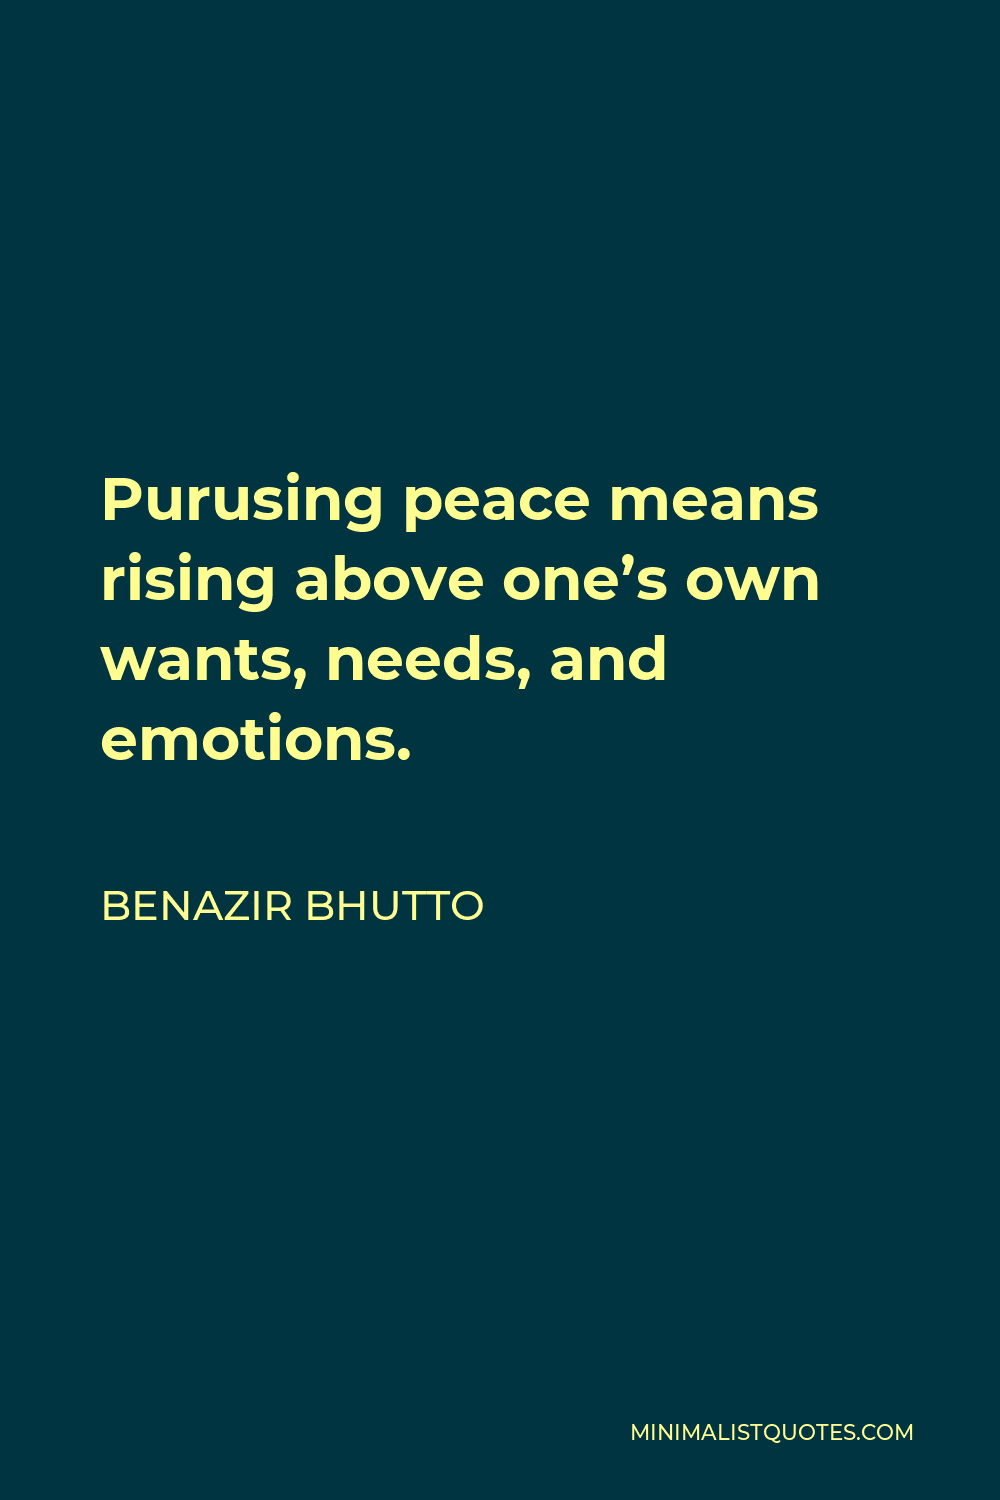 Benazir Bhutto Quote - Purusing peace means rising above one’s own wants, needs, and emotions.